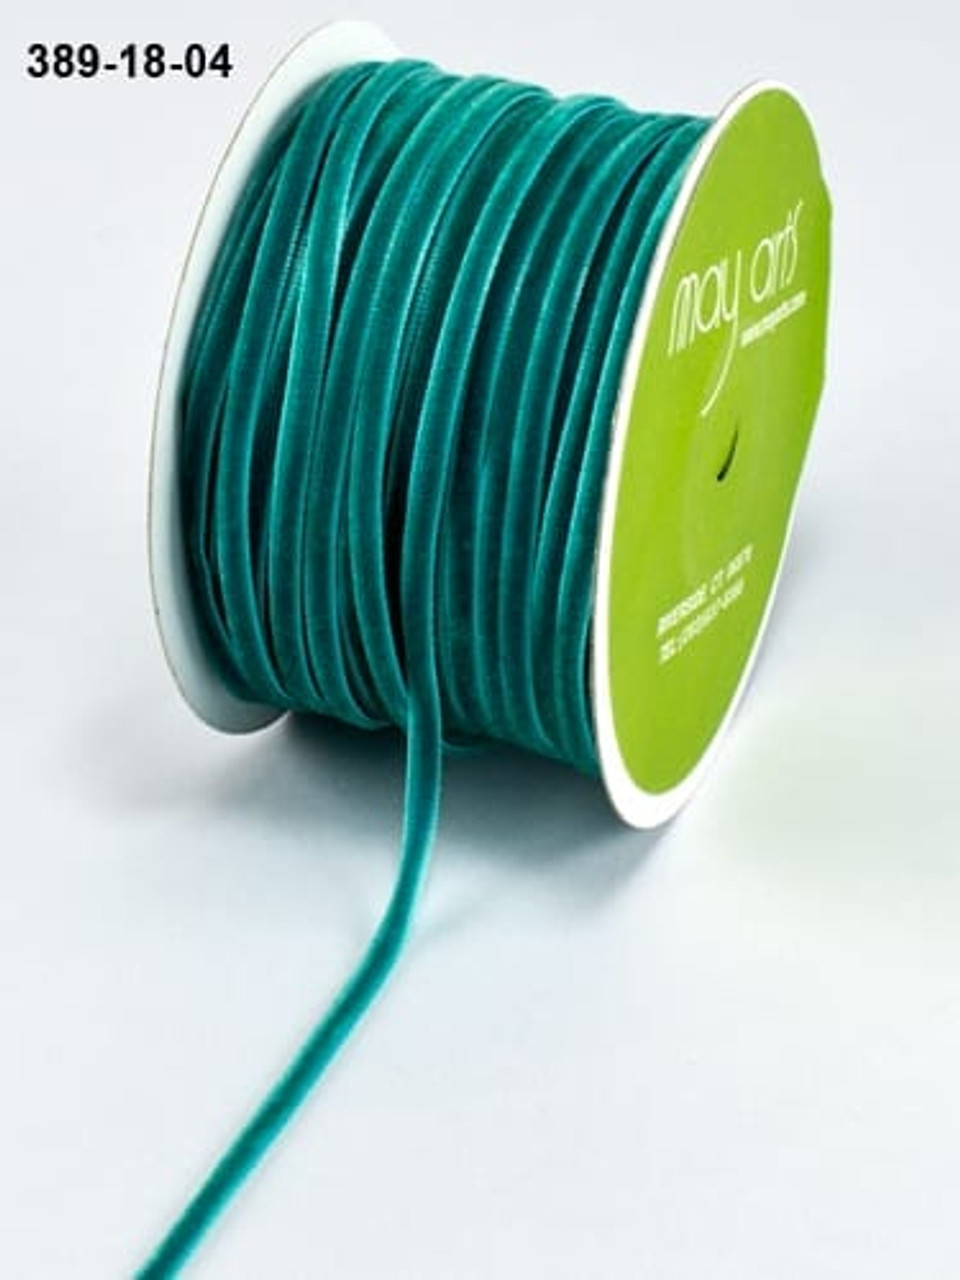 May Arts 1/8 inch Velvet String Cord Ribbon with Woven Edge - Teal